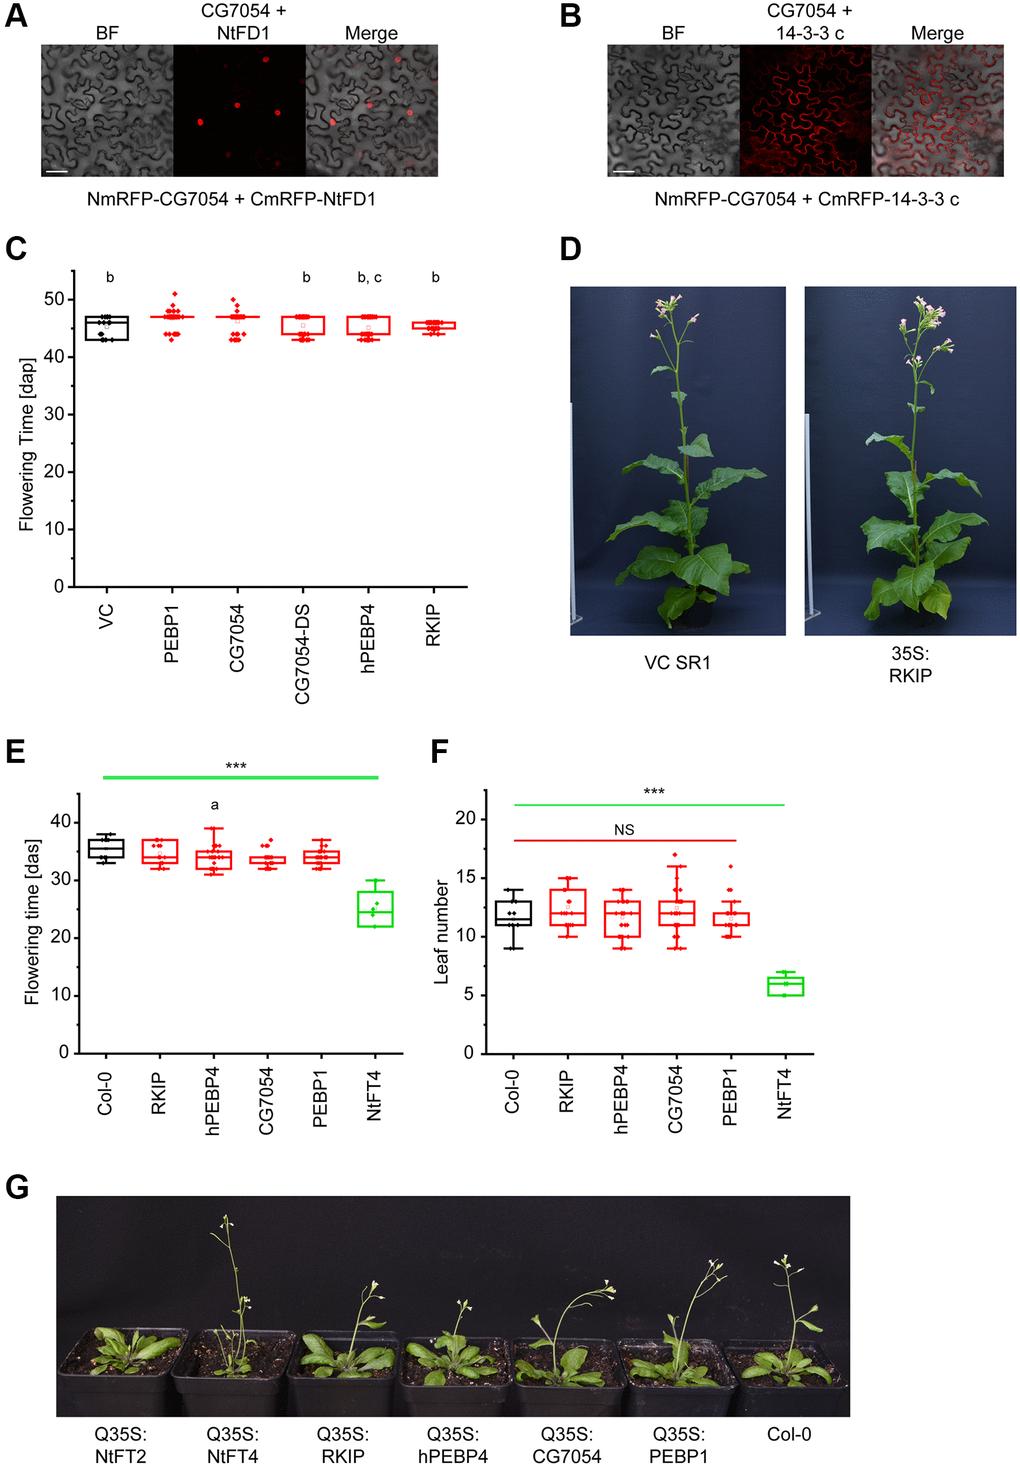 Expression of animal PEBPs in tobacco and Arabidopsis. (A) Bimolecular fluorescence complementation (BiFC) in infiltrated Nicotiana benthamiana leaves, representatively showing the interaction between Drosophila PEBP (NmRFP-CG7054) and NtFD1 (CmRFP-NtFD1). (B) BiFC representatively showing the interaction between Drosophila PEBP (NmRFP-CG7054) and tobacco 14-3-3 c (CmRFP-14-3-3 c). Scale bar = 50 μm. (C) Flowering time of tobacco lines expressing PEBP1, CG7054, CG7054-DS, RKIP or hPEBP4 under the control of the cauliflower mosaic virus 35S promoter. Abbreviation: VC: vector control. Flowering time was measured under long-day (LD) conditions in days after potting (dap). Data are means ± SEM, n = 50 (PEBP1, CG7054, CG7054-DS, RKIP and hPEBP4), n = 10 (VC). Significance was tested by one-way ANOVA and Tukey’s post hoc test (b significant compared with PEBP1, c significant compared with CG7054, all other comparisons non-significant). (D) Representative image of a transgenic tobacco plant expressing RKIP compared with the VC. Flowering time (E) and rosette leaf number at the onset of flowering (F) of transgenic Arabidopsis lines expressing RKIP, hPEBP4, CG7054, PEBP1 or the floral inducer NtFT4 under the control of the quadruple cauliflower 35S promoter. Col-0 = wild type A. thaliana Col-0 ecotype used for transformation. Flowering time was measured under LD conditions in days after seeding (das). Data are means ± SEM, n = 30 (CG7054, CG19594), n = 29 (hPEBP4), n = 19 (RKIP), n = 10 (Col-0), n = 8 (NtFT4); ****p a significant compared with Col-0 (p = 0.091) with all other comparisons being non-significant). Abbreviation: NS: no significant differences in any pairwise comparison. All p-values are provided in Supplementary Table 9. (G) Representative images of transgenic Arabidopsis plants expressing different PEBPs. Col-0 wild type plants (far right), and early flowering Q35-S:NtFT4 (left) and late flowering Q35-S:NtFT2 (far left) plants are shown in comparison with plants expressing the animal PEBPs.